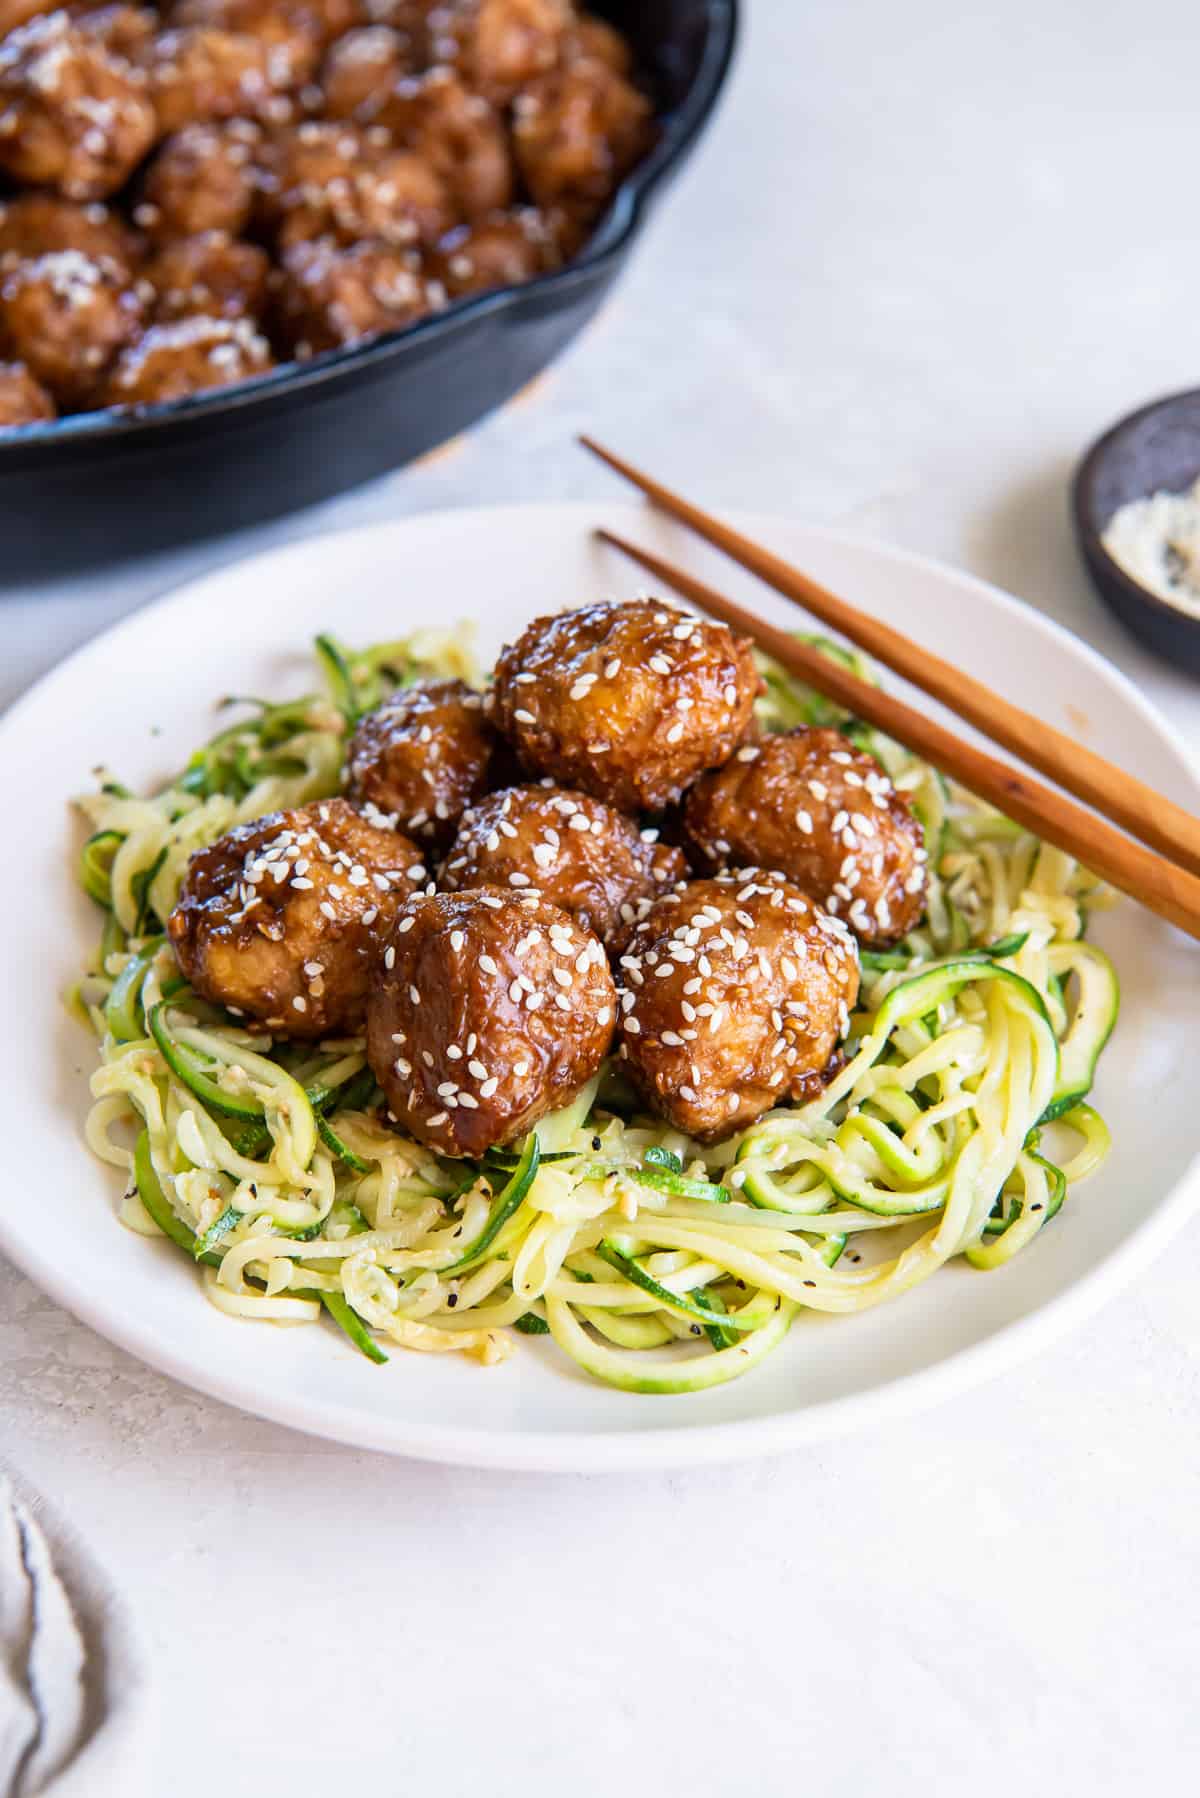 Asian meatballs over zucchini noodles on a white plate with chopsticks lying next to it.